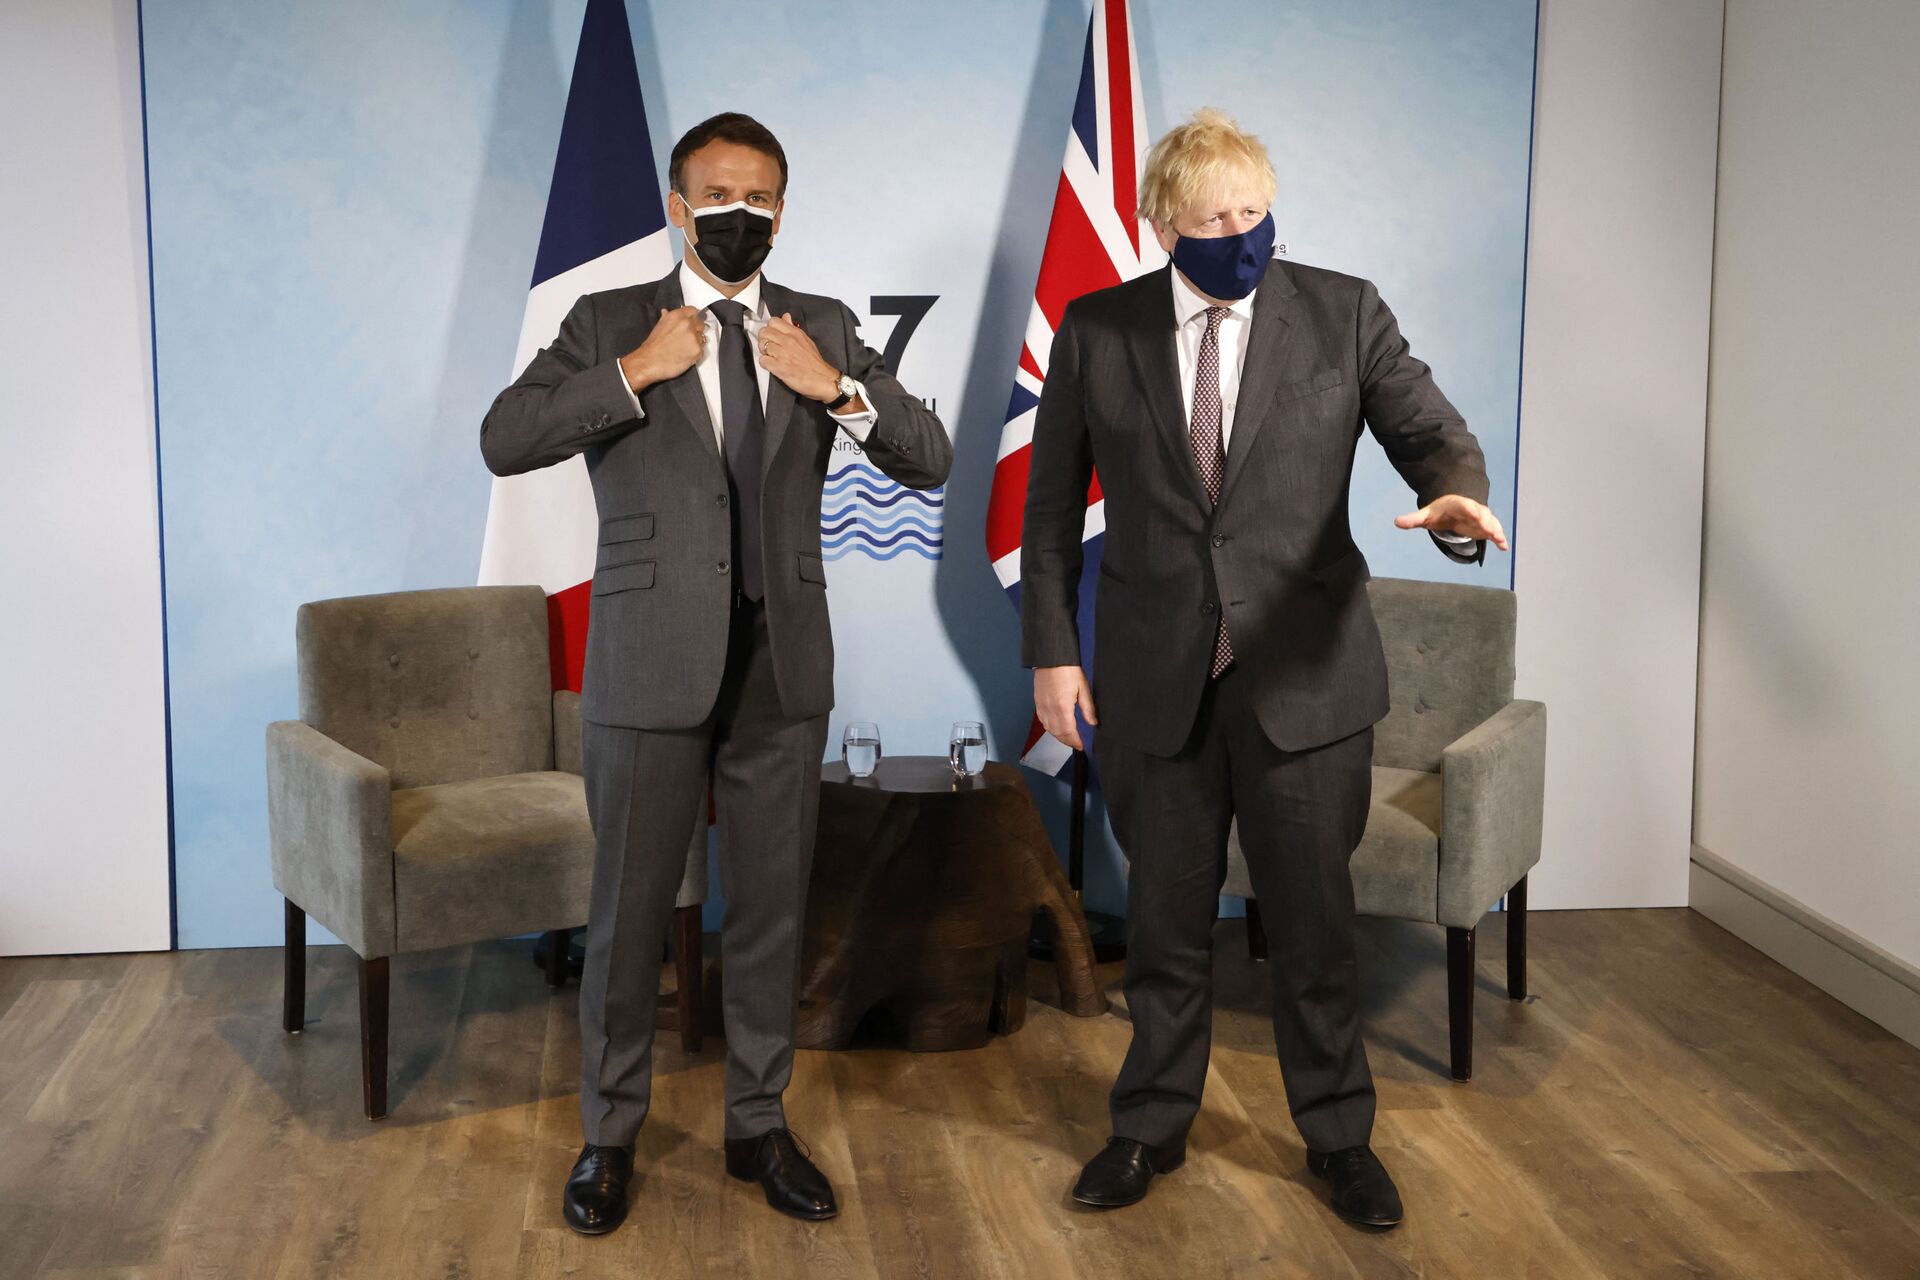 Britain's Prime Minister Boris Johnson and France's President Emmanuel Macron take part in a bilateral meeting during the G7 summit in Carbis bay, Cornwall on June 12, 2021.  - Sputnik International, 1920, 29.10.2021